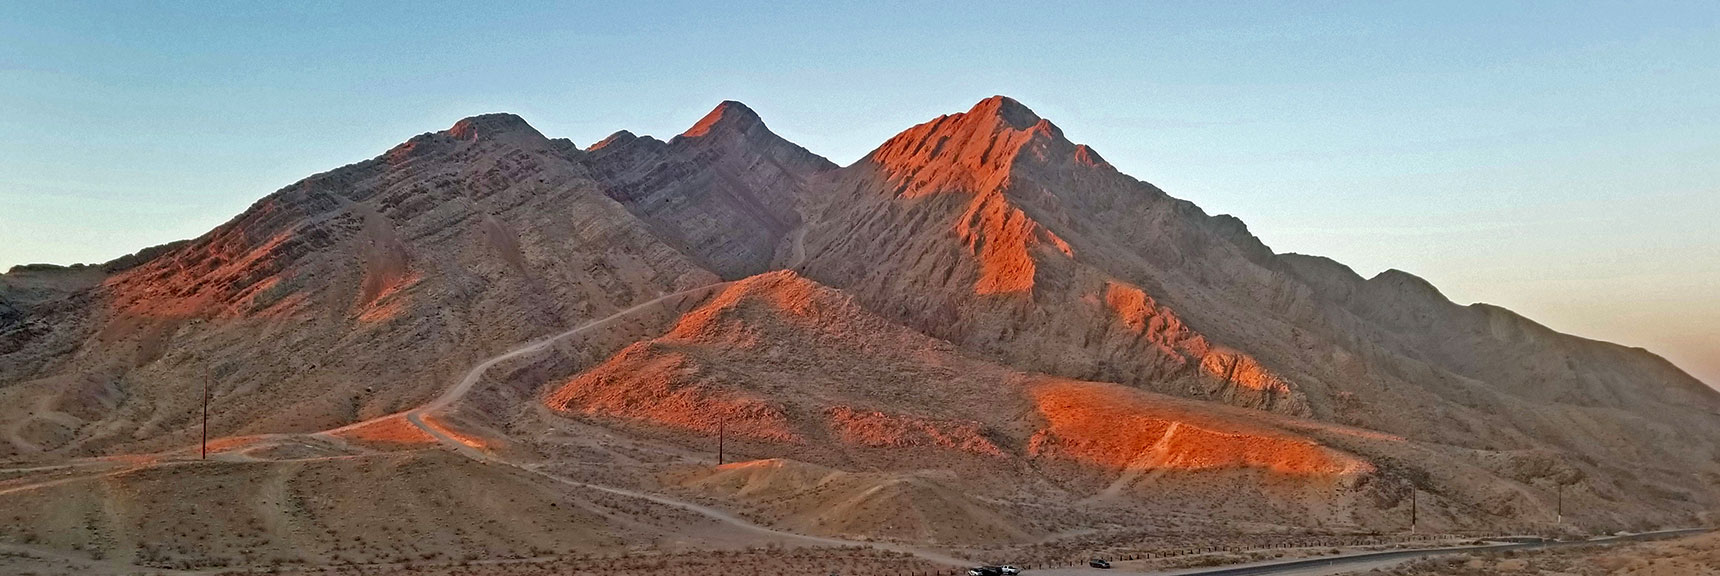 Frenchman Mt. Sunrise Viewed from Saddle on Trail Toward Sunrise Mountain | Sunrise Mountain, Las Vegas, Nevada